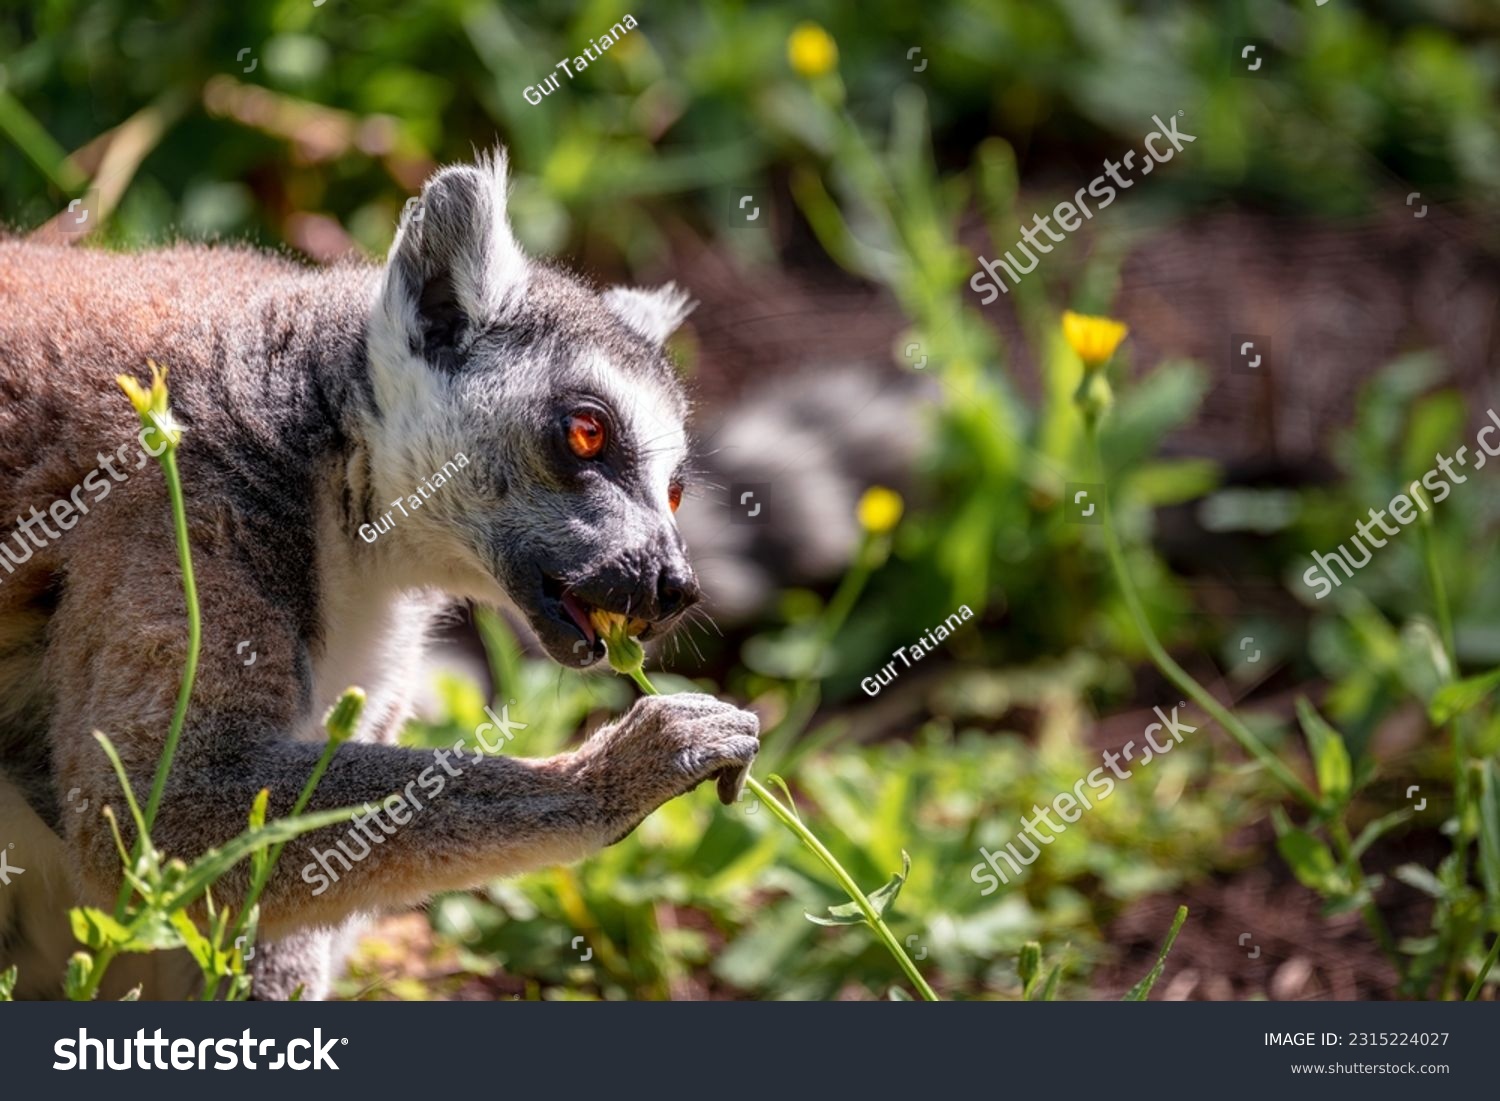 Ring-tailed lemur (Lemur Catta) sitting on a background of green grass and yellow flowers in Safari Ramat Gan, Israel. #2315224027